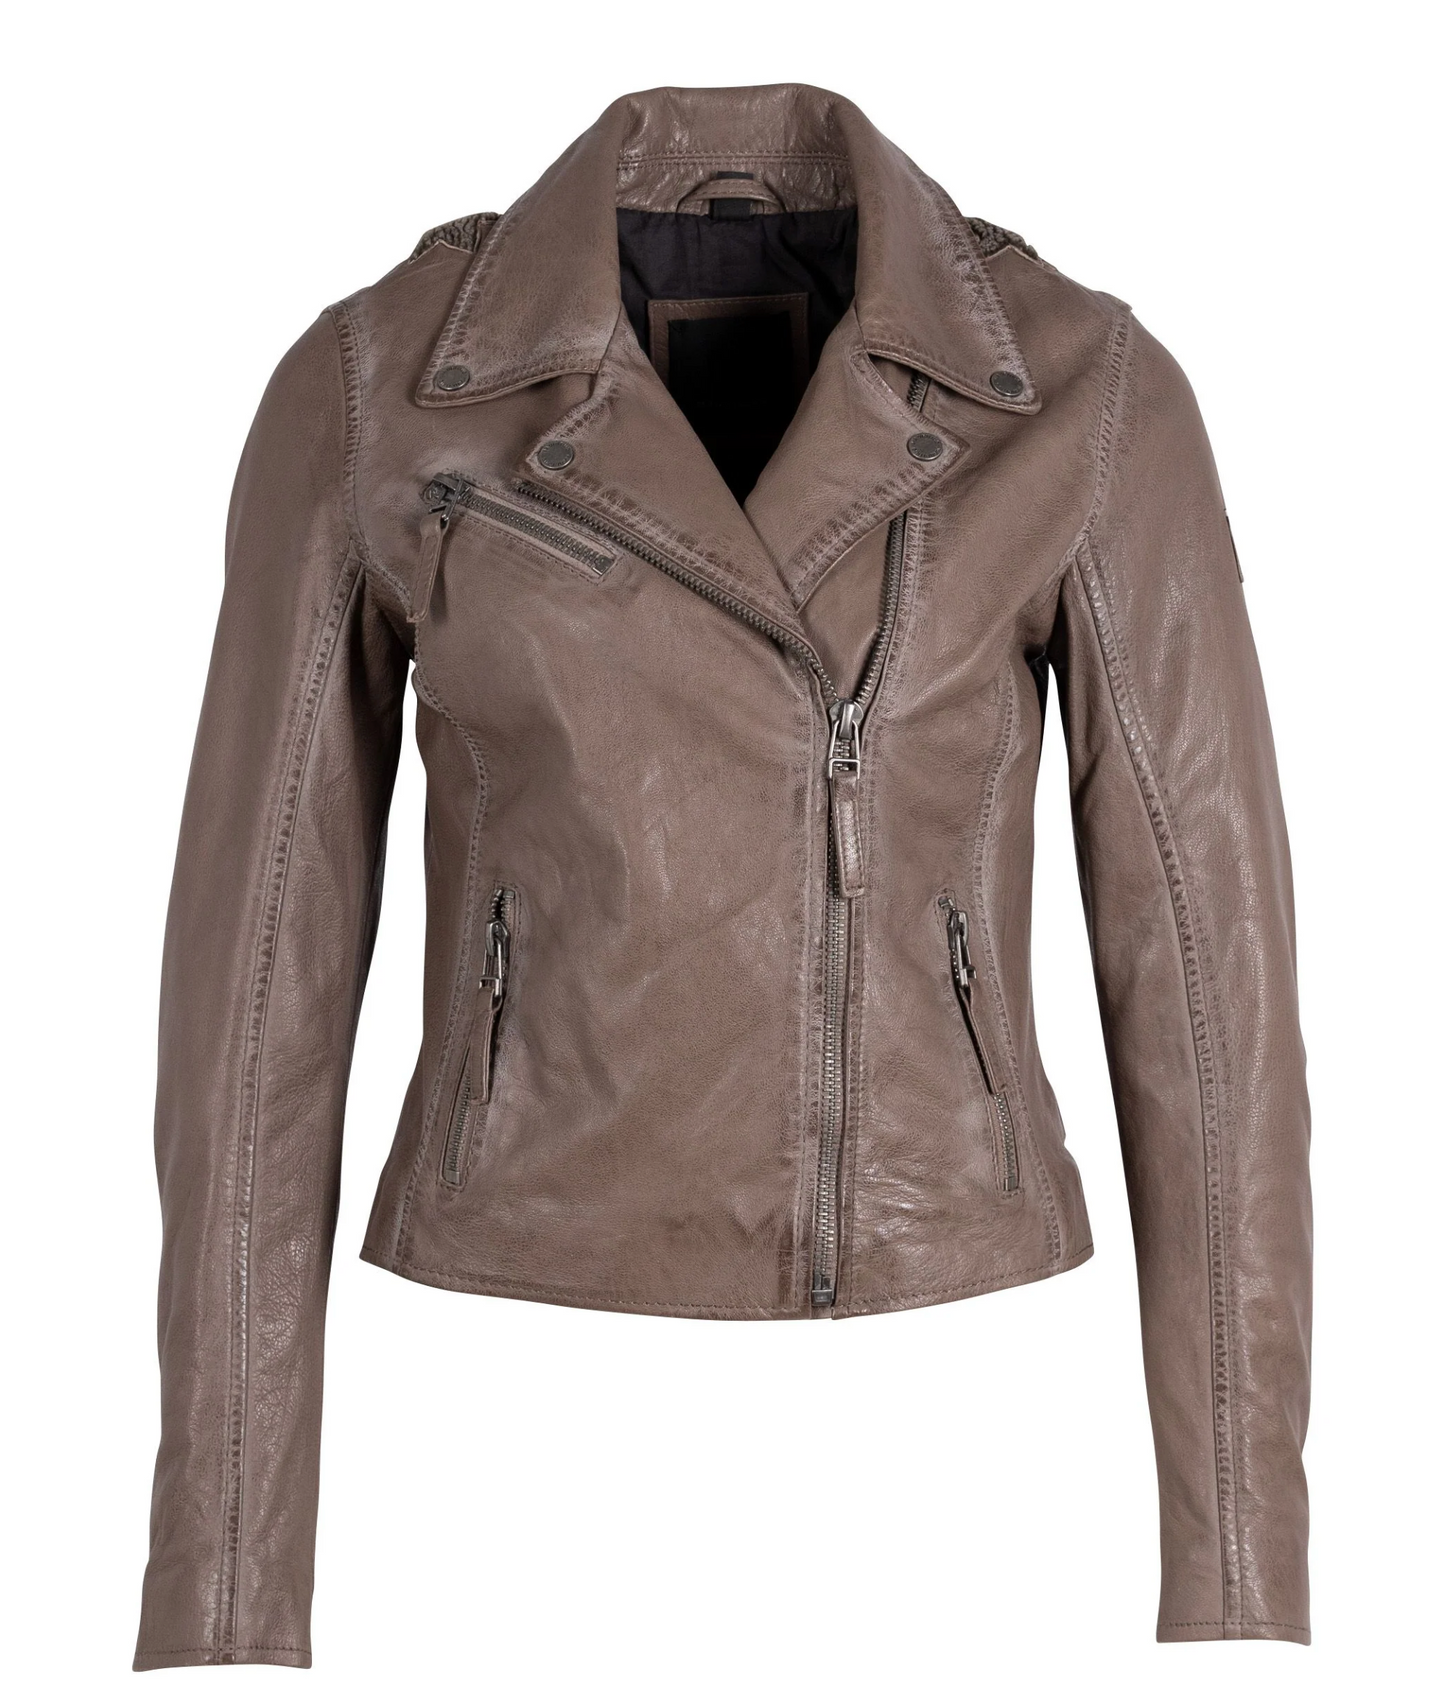 Mauritius Mauritius Christy RF Woman's Leather Jacket with Sherpa Stars - Cozy Taupe available at The Good Life Boutique